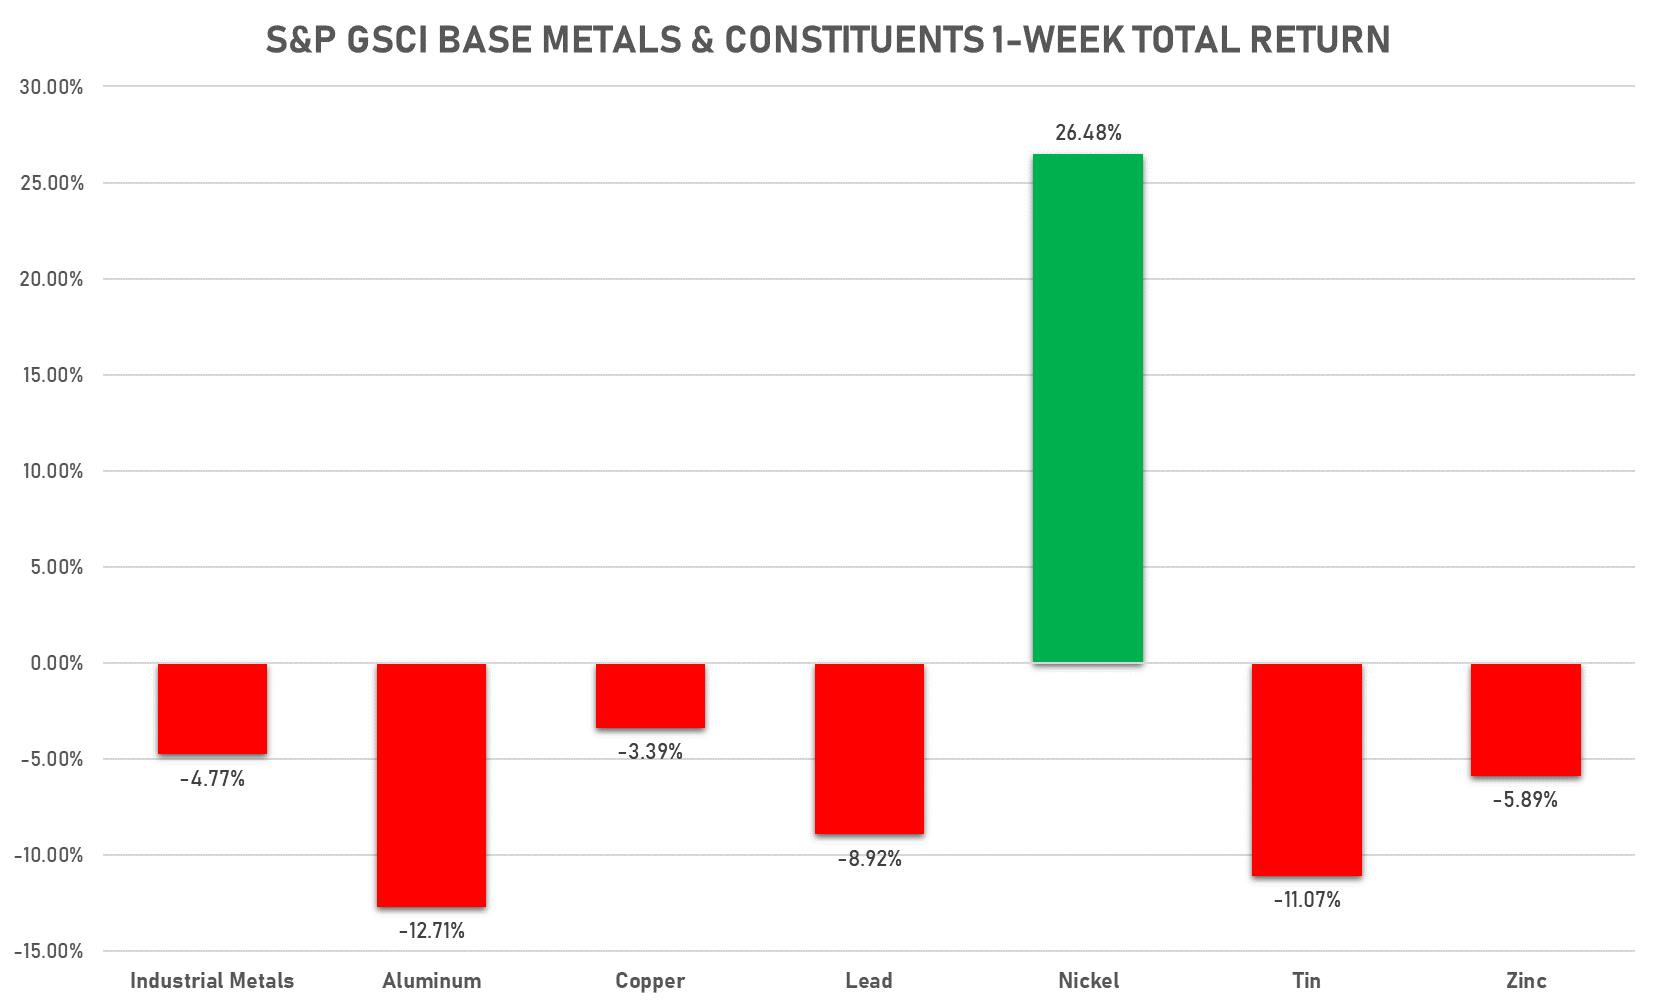 GSCI Base Metals This Week | Sources: phipost.com, FactSet data